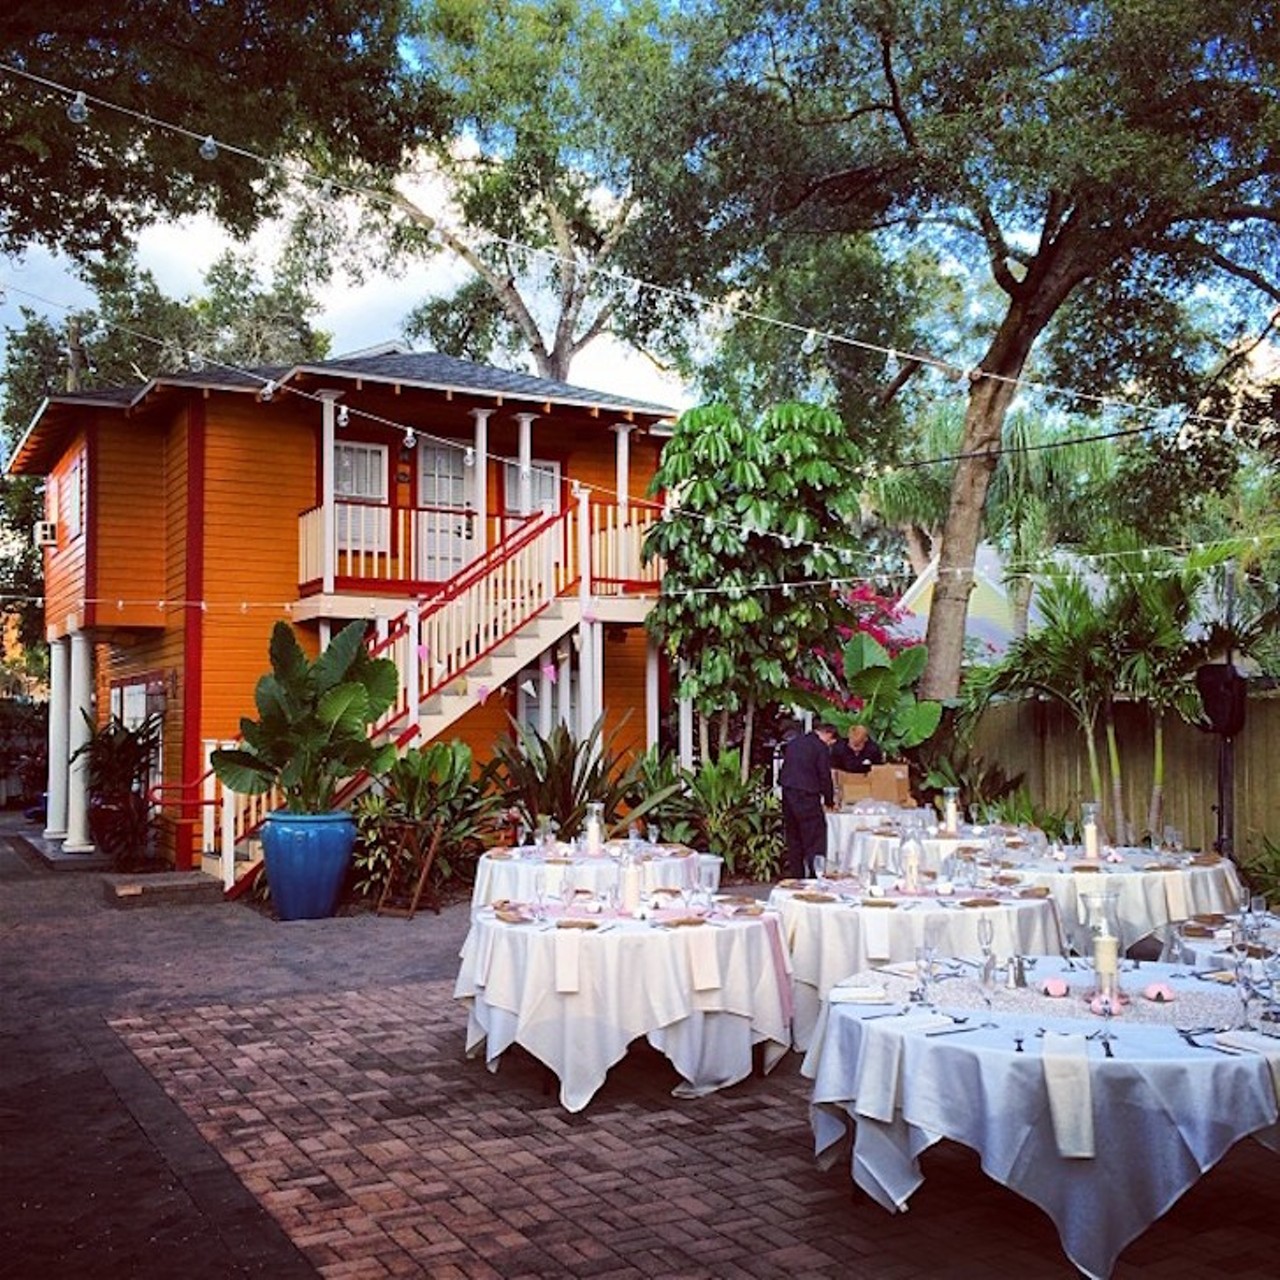 Veranda at Thornton Park
Ditch the ballroom for something that feels a lot more intimate. The Veranda is constantly being used for weddings, understandably. Good energy all around.
111 N. Summerlin Ave. | 914-497-3986
Photo via skoba85/Instagram